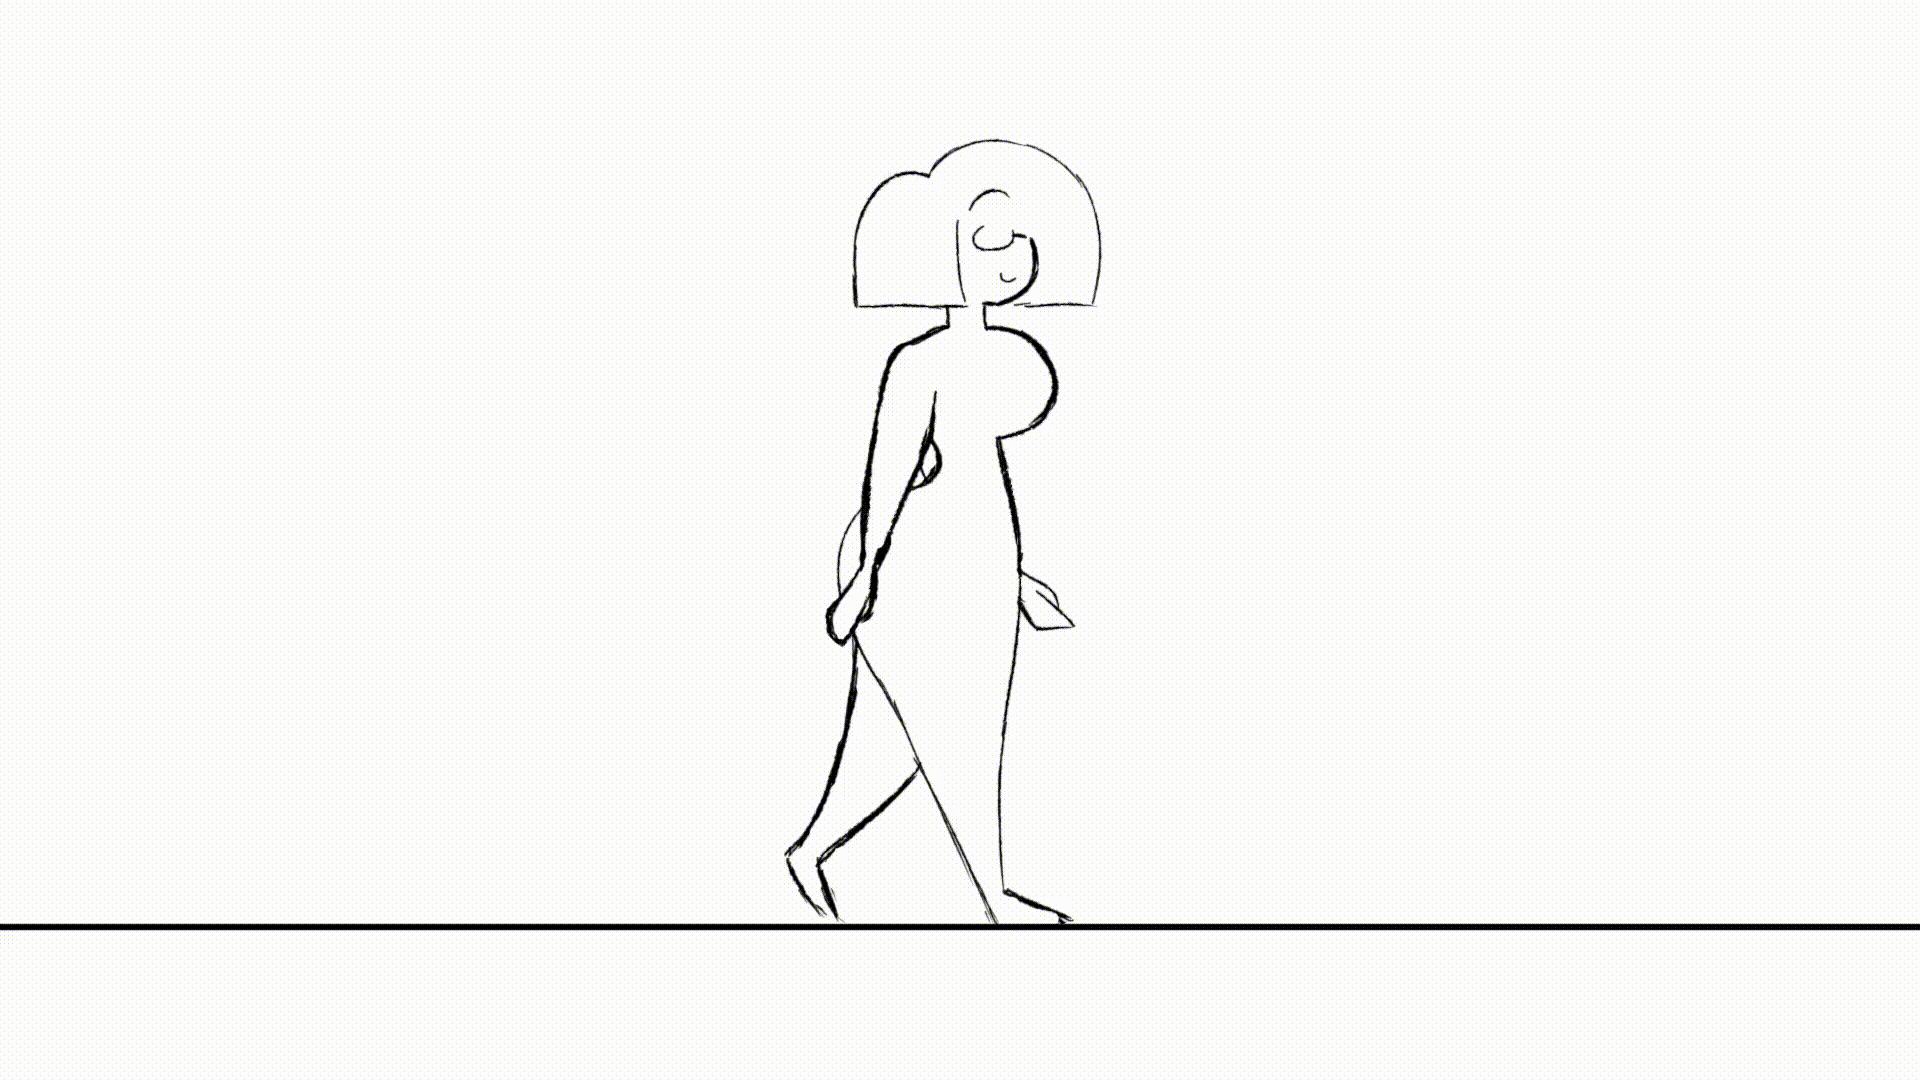 Lisa's walk-cycle, animation test for 'Invisible' by PhillipFPGA, 2019